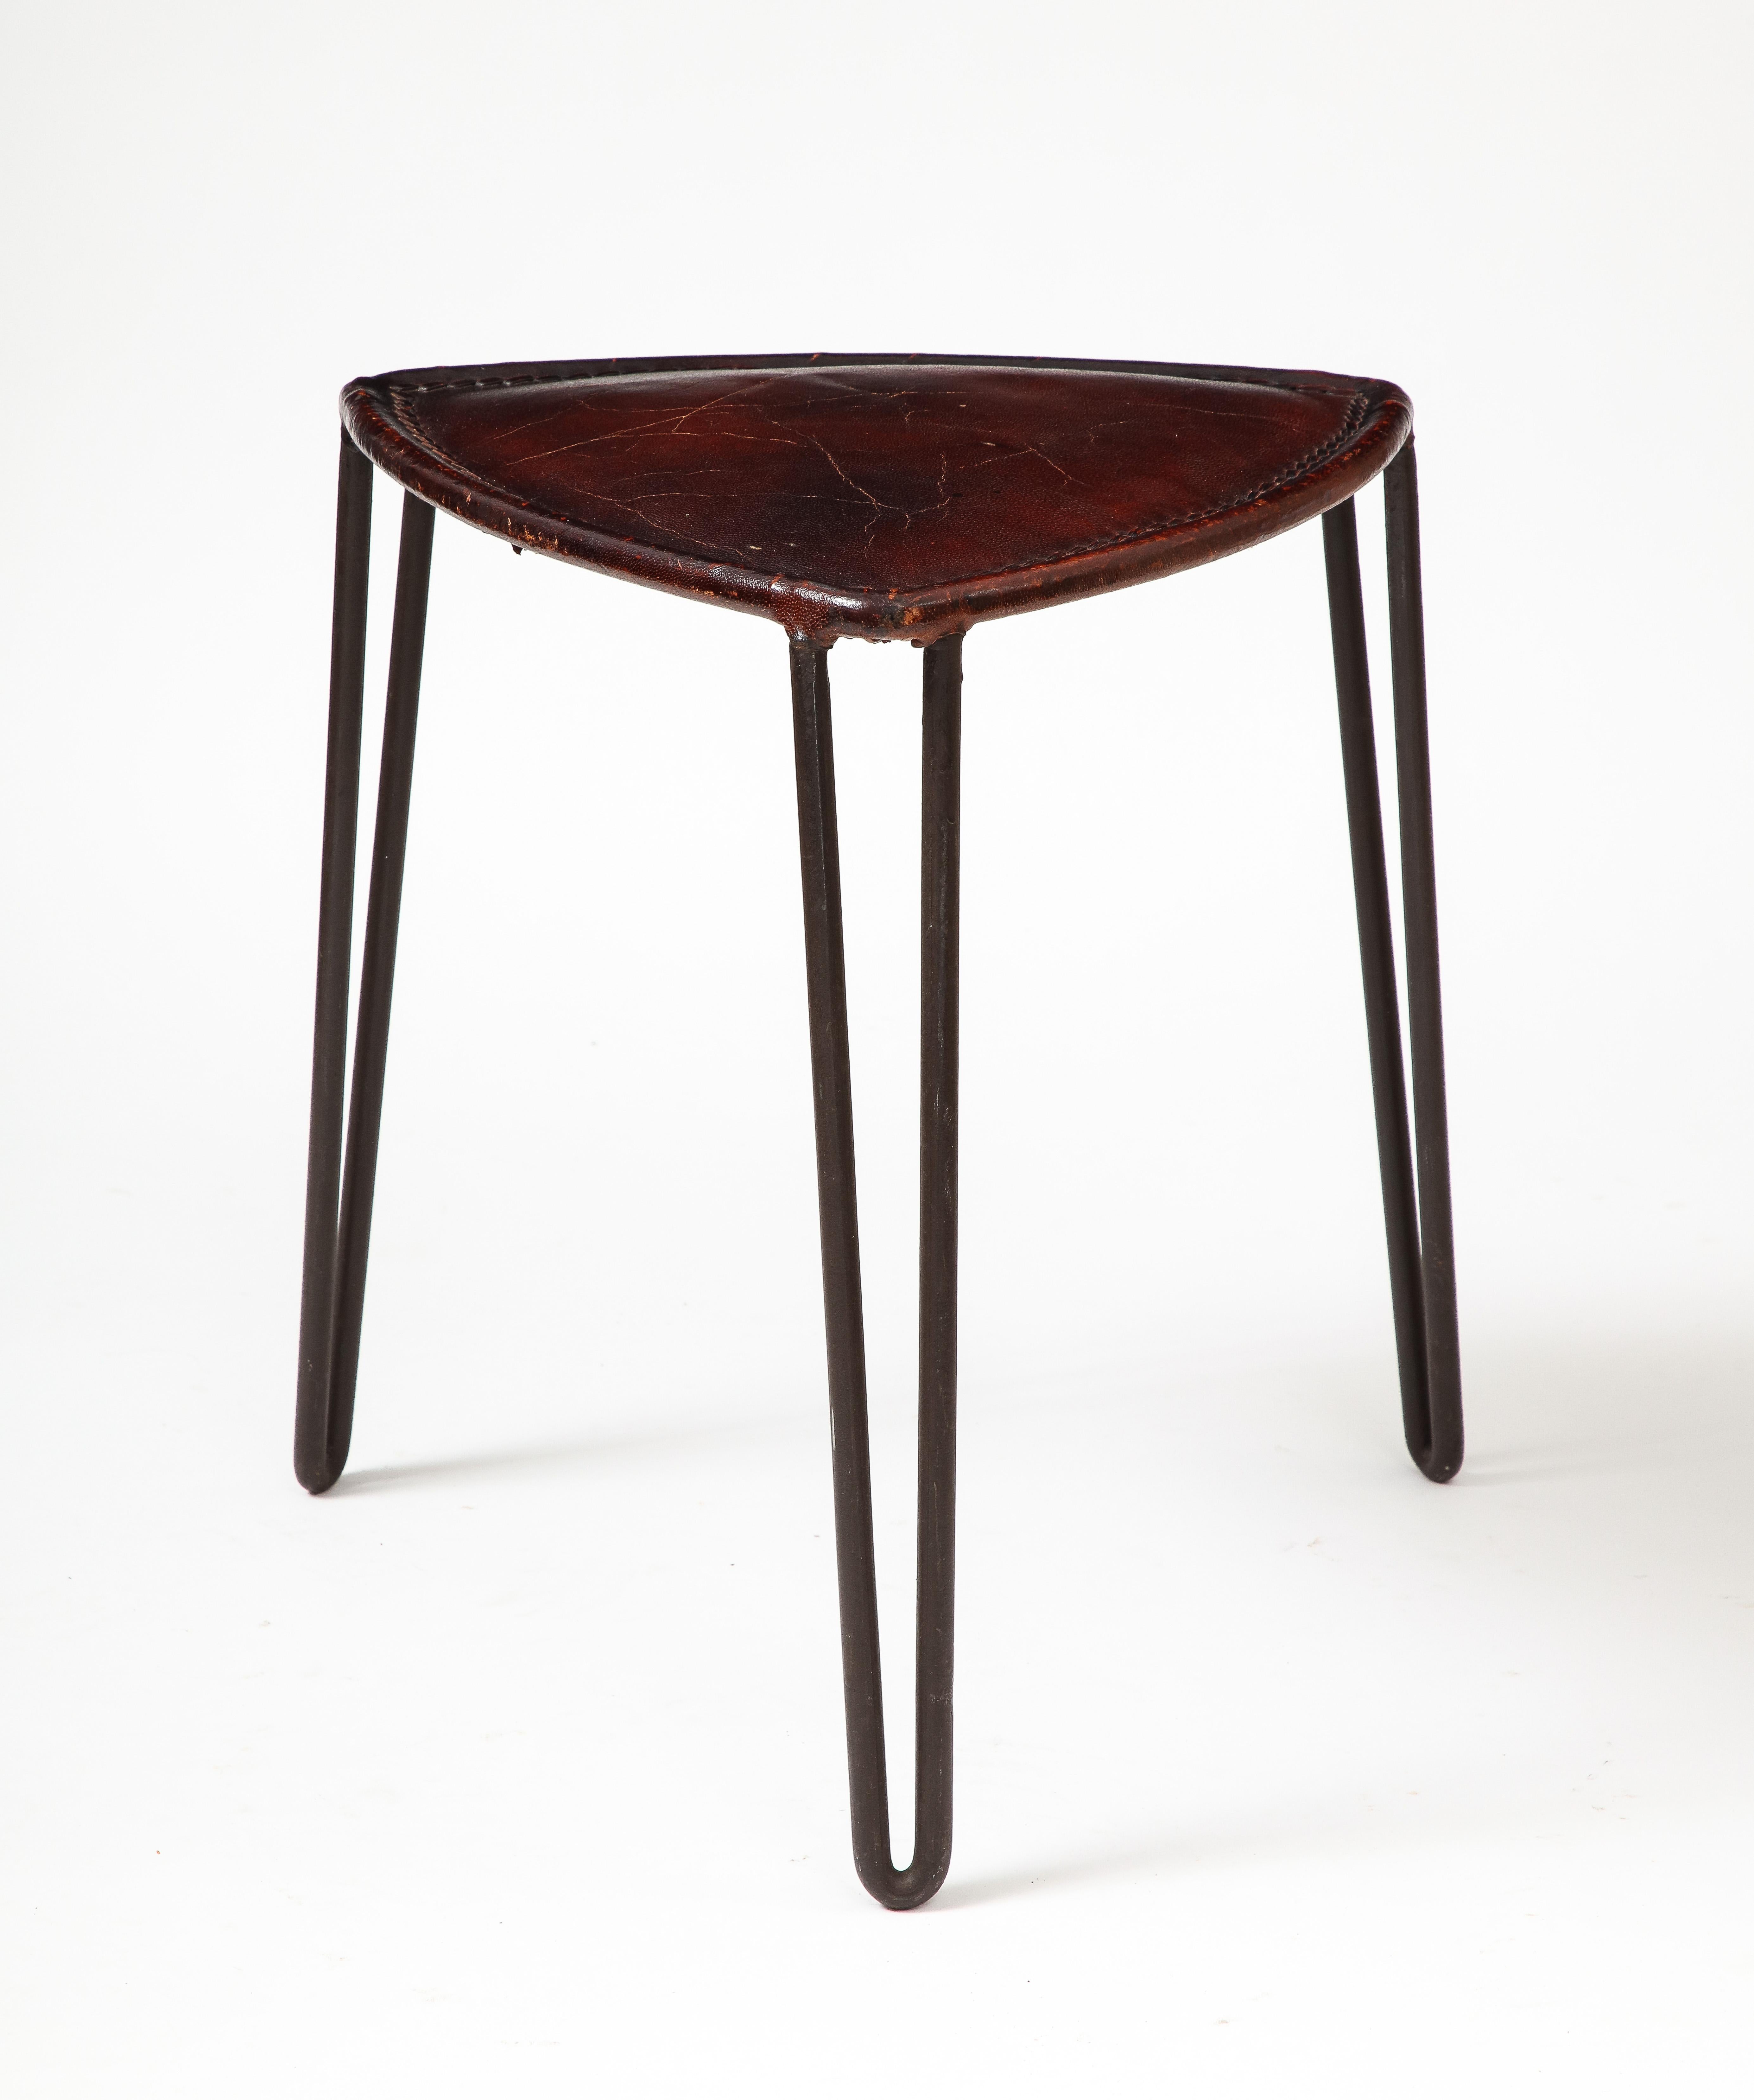 Leather and Metal Stool, France, c. 1950 For Sale 3